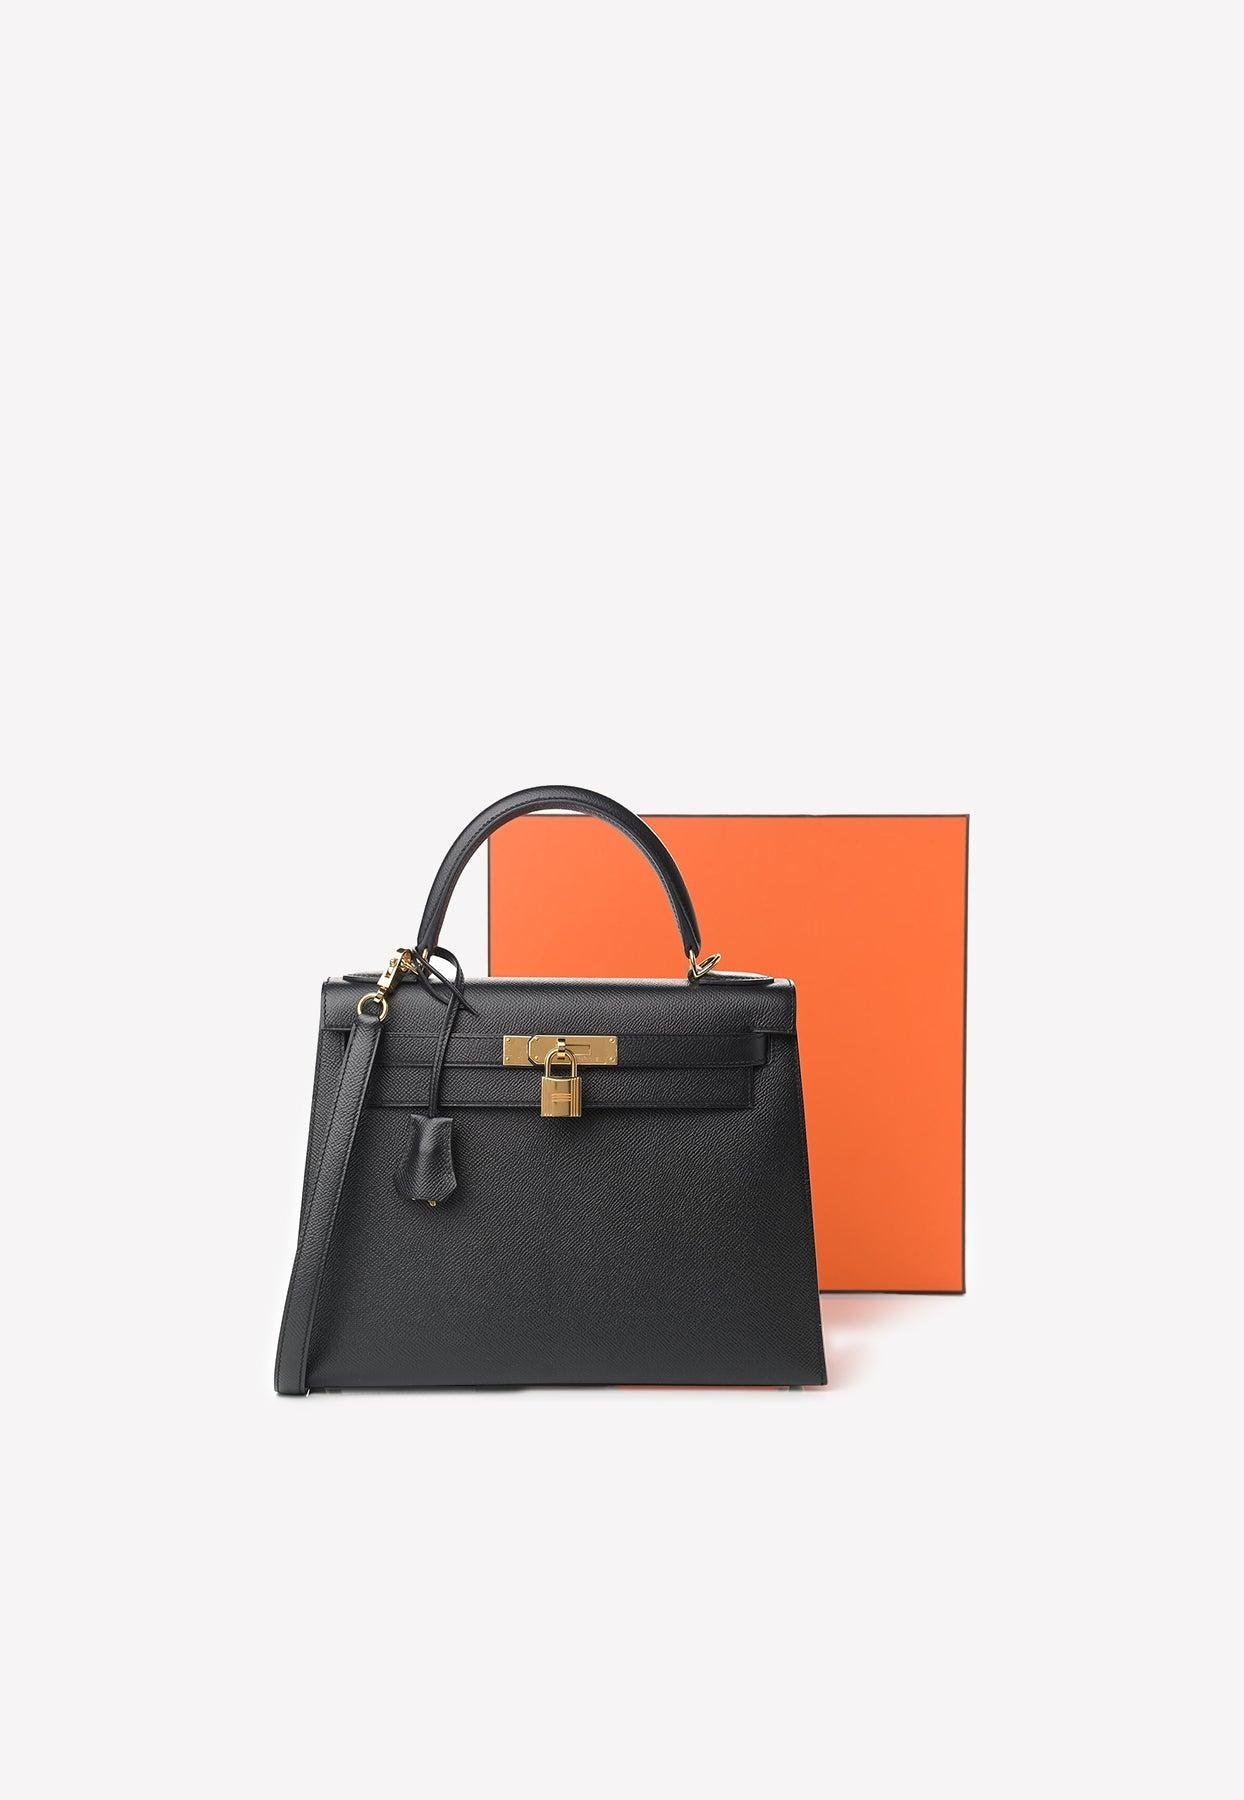 Hermes Kelly Sellier 28 Gold Madame Gold Hardware